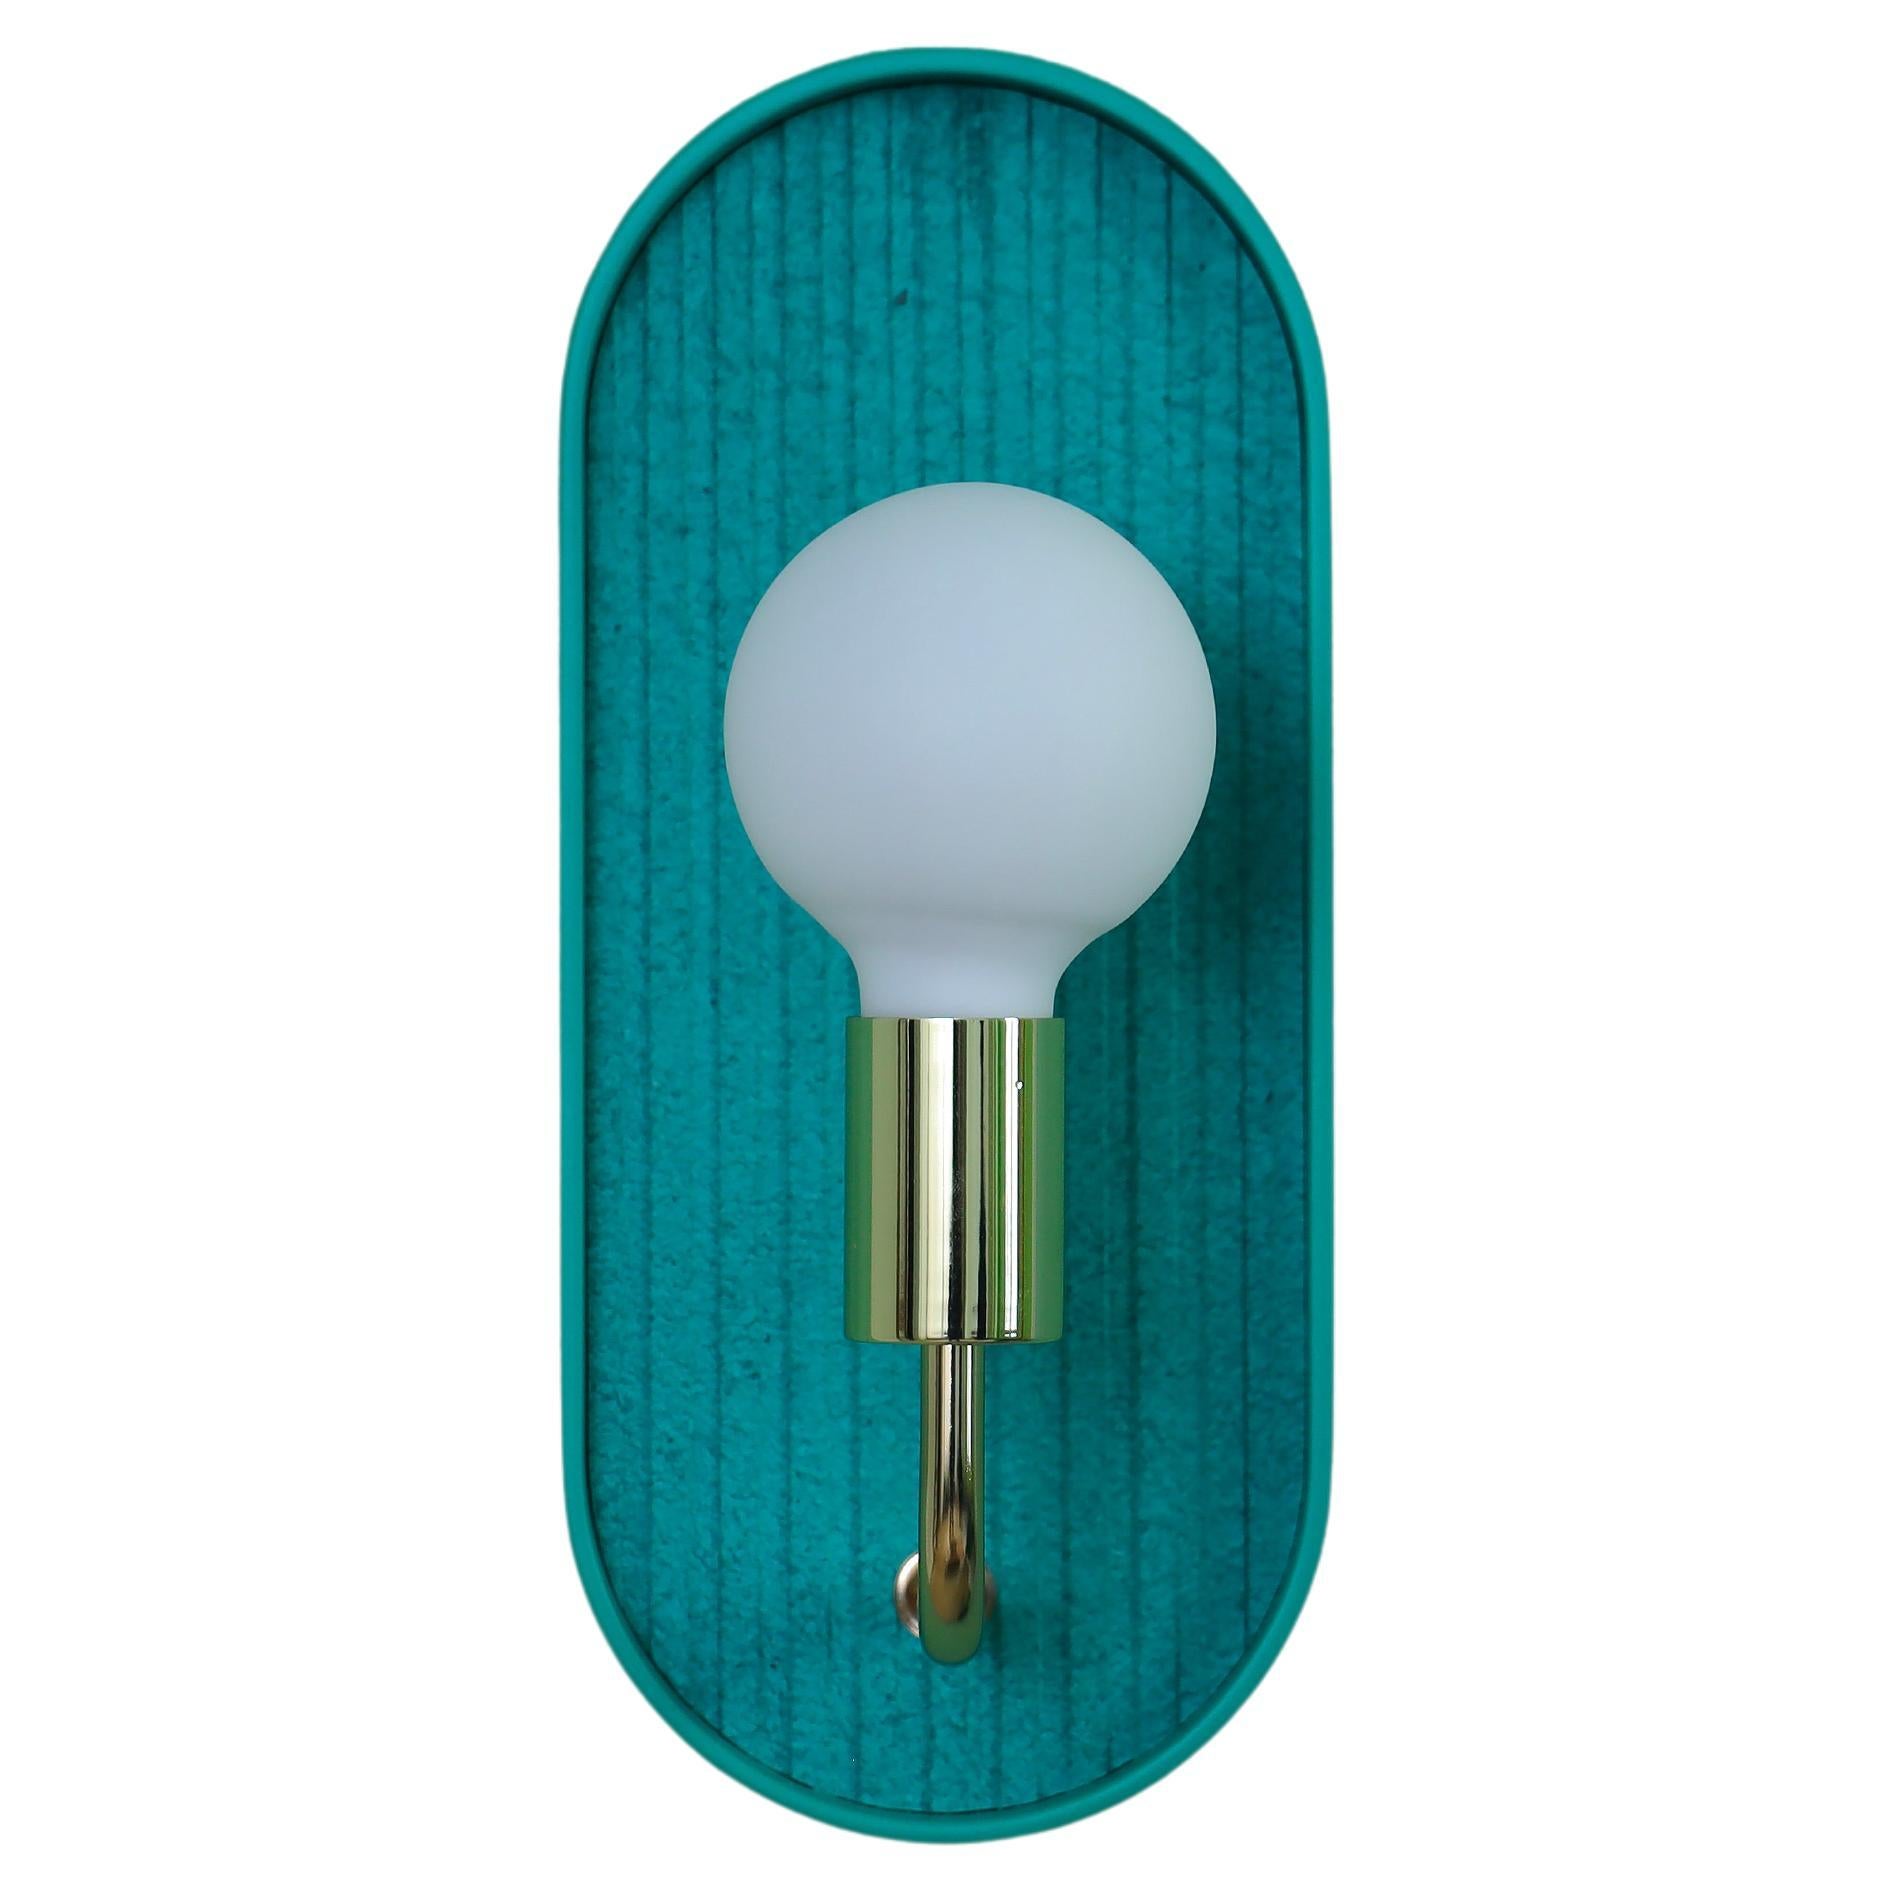 Bracketlamp MiniOblong green - green lacquered solid basswood and paper in Stock For Sale